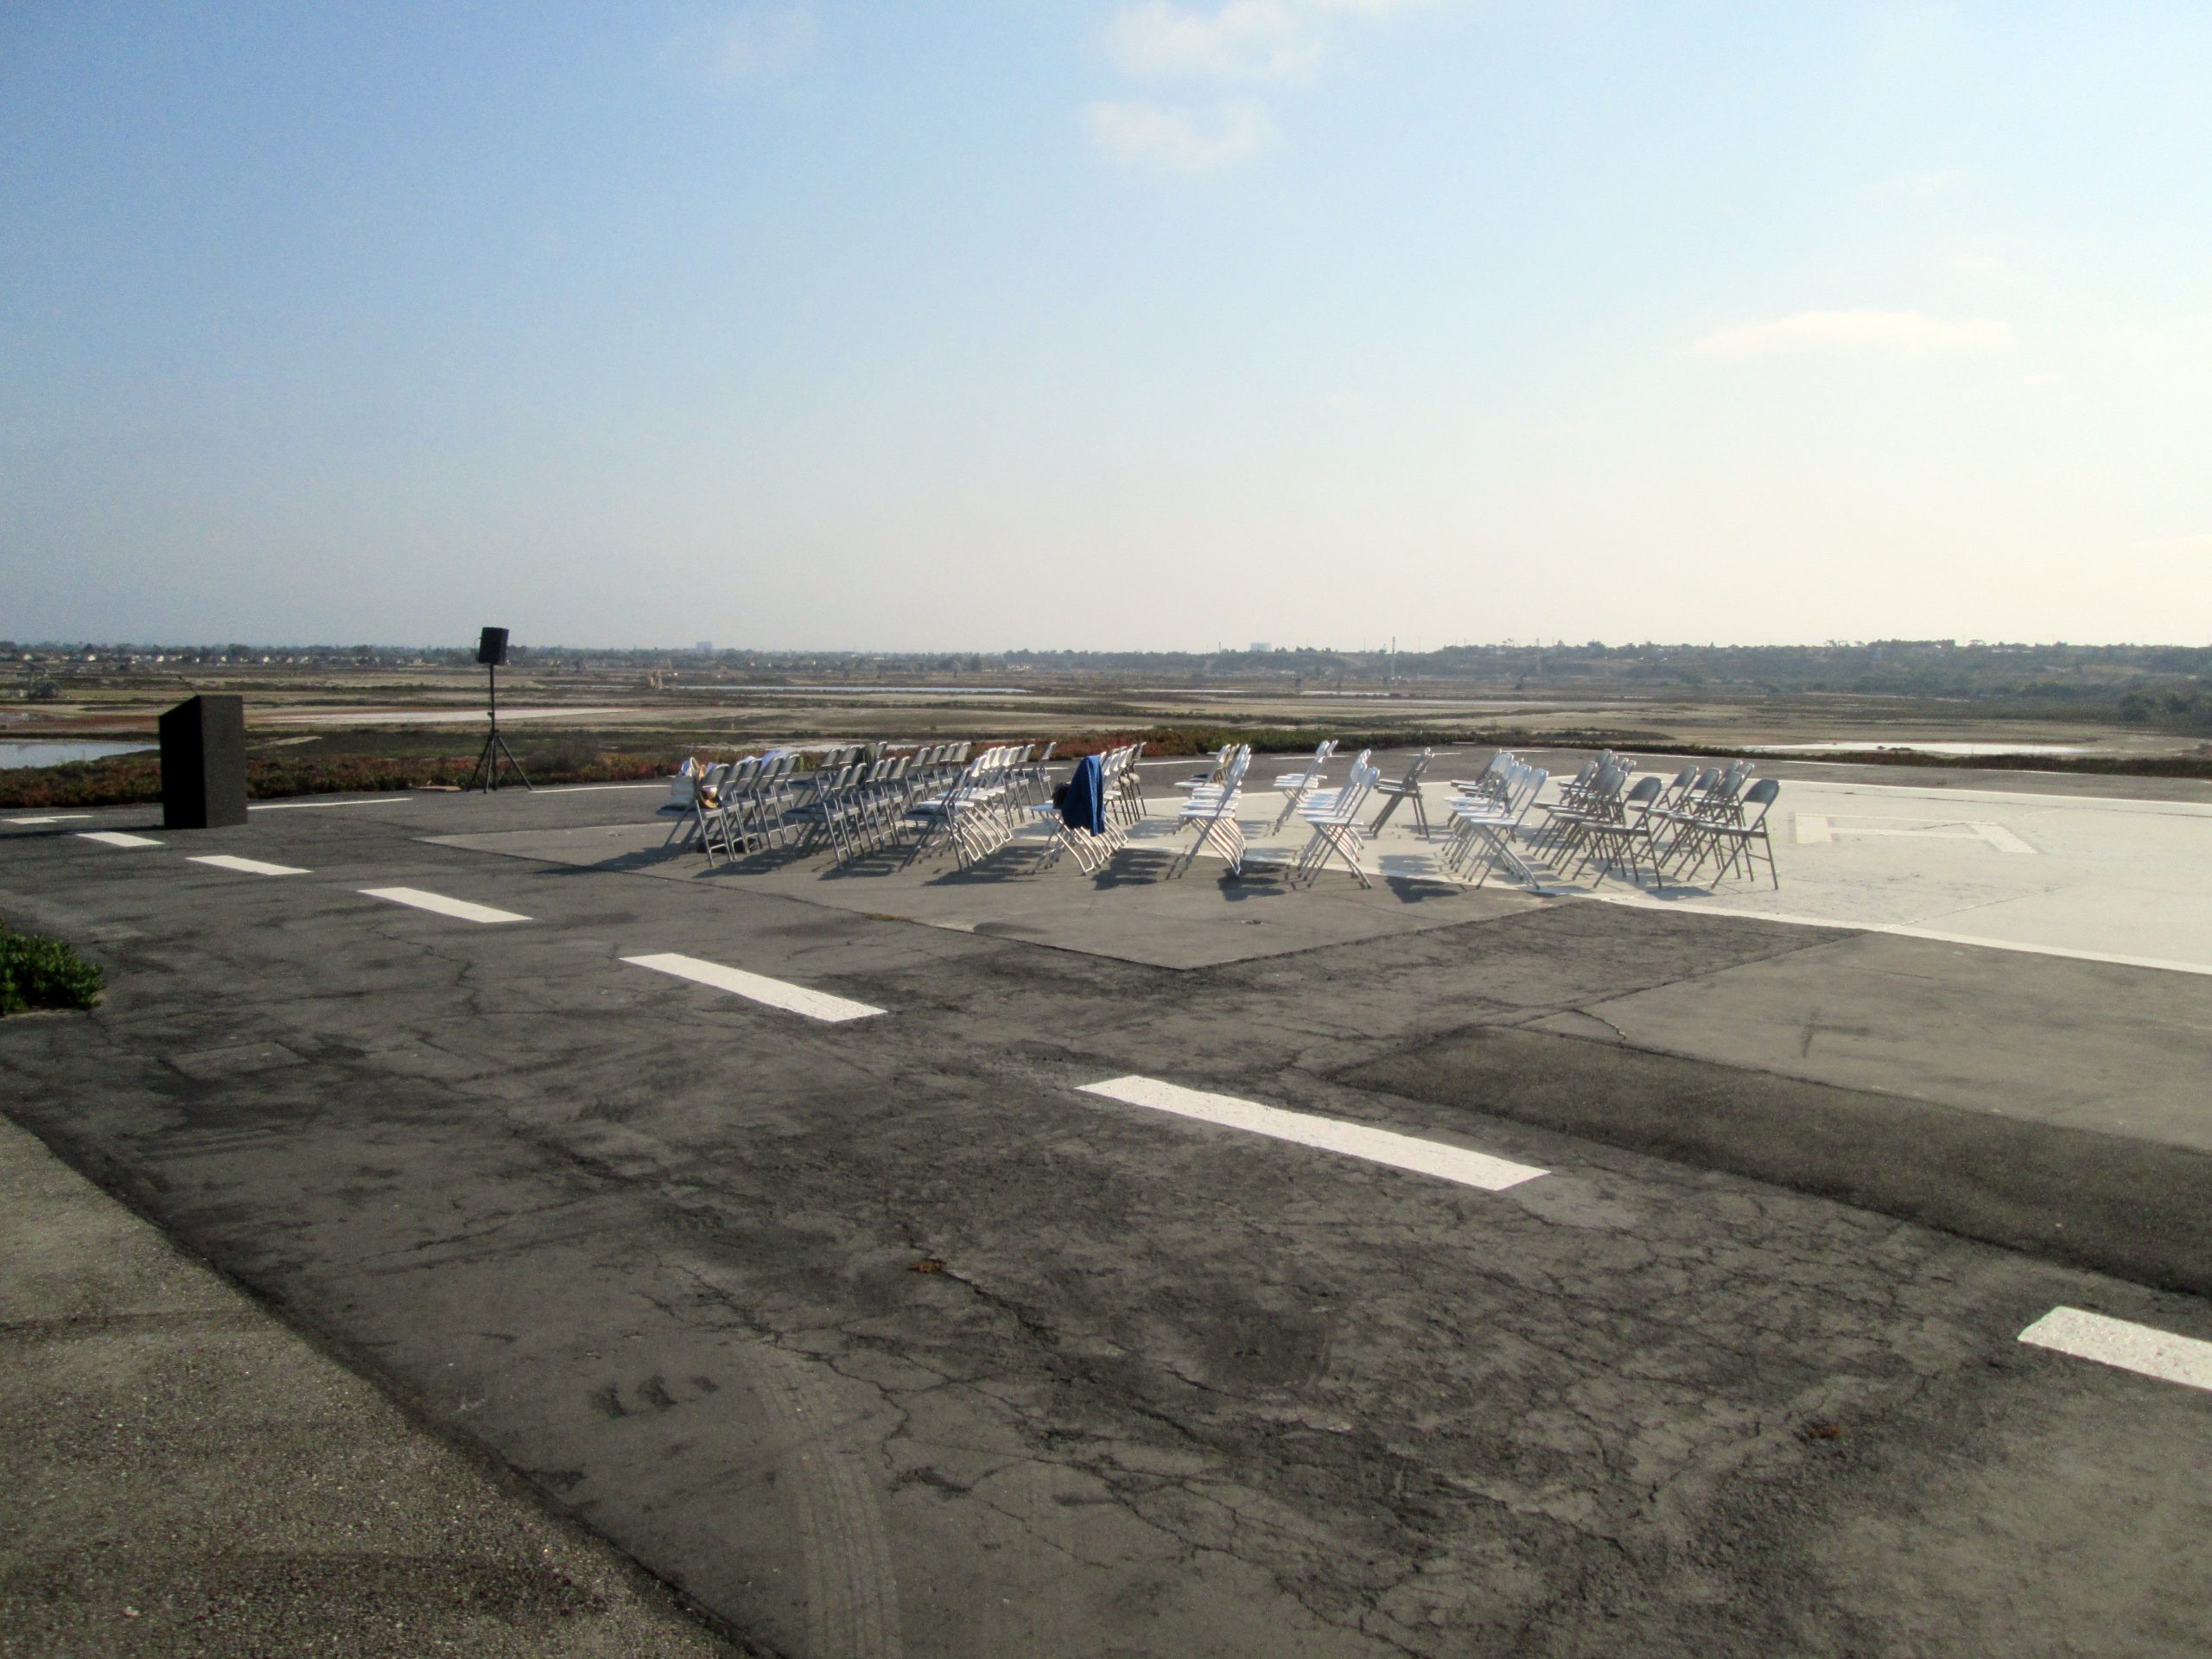 Parking lot at Bolsa Chica set up for speakers and an audience for the 10th anniversary celebration.